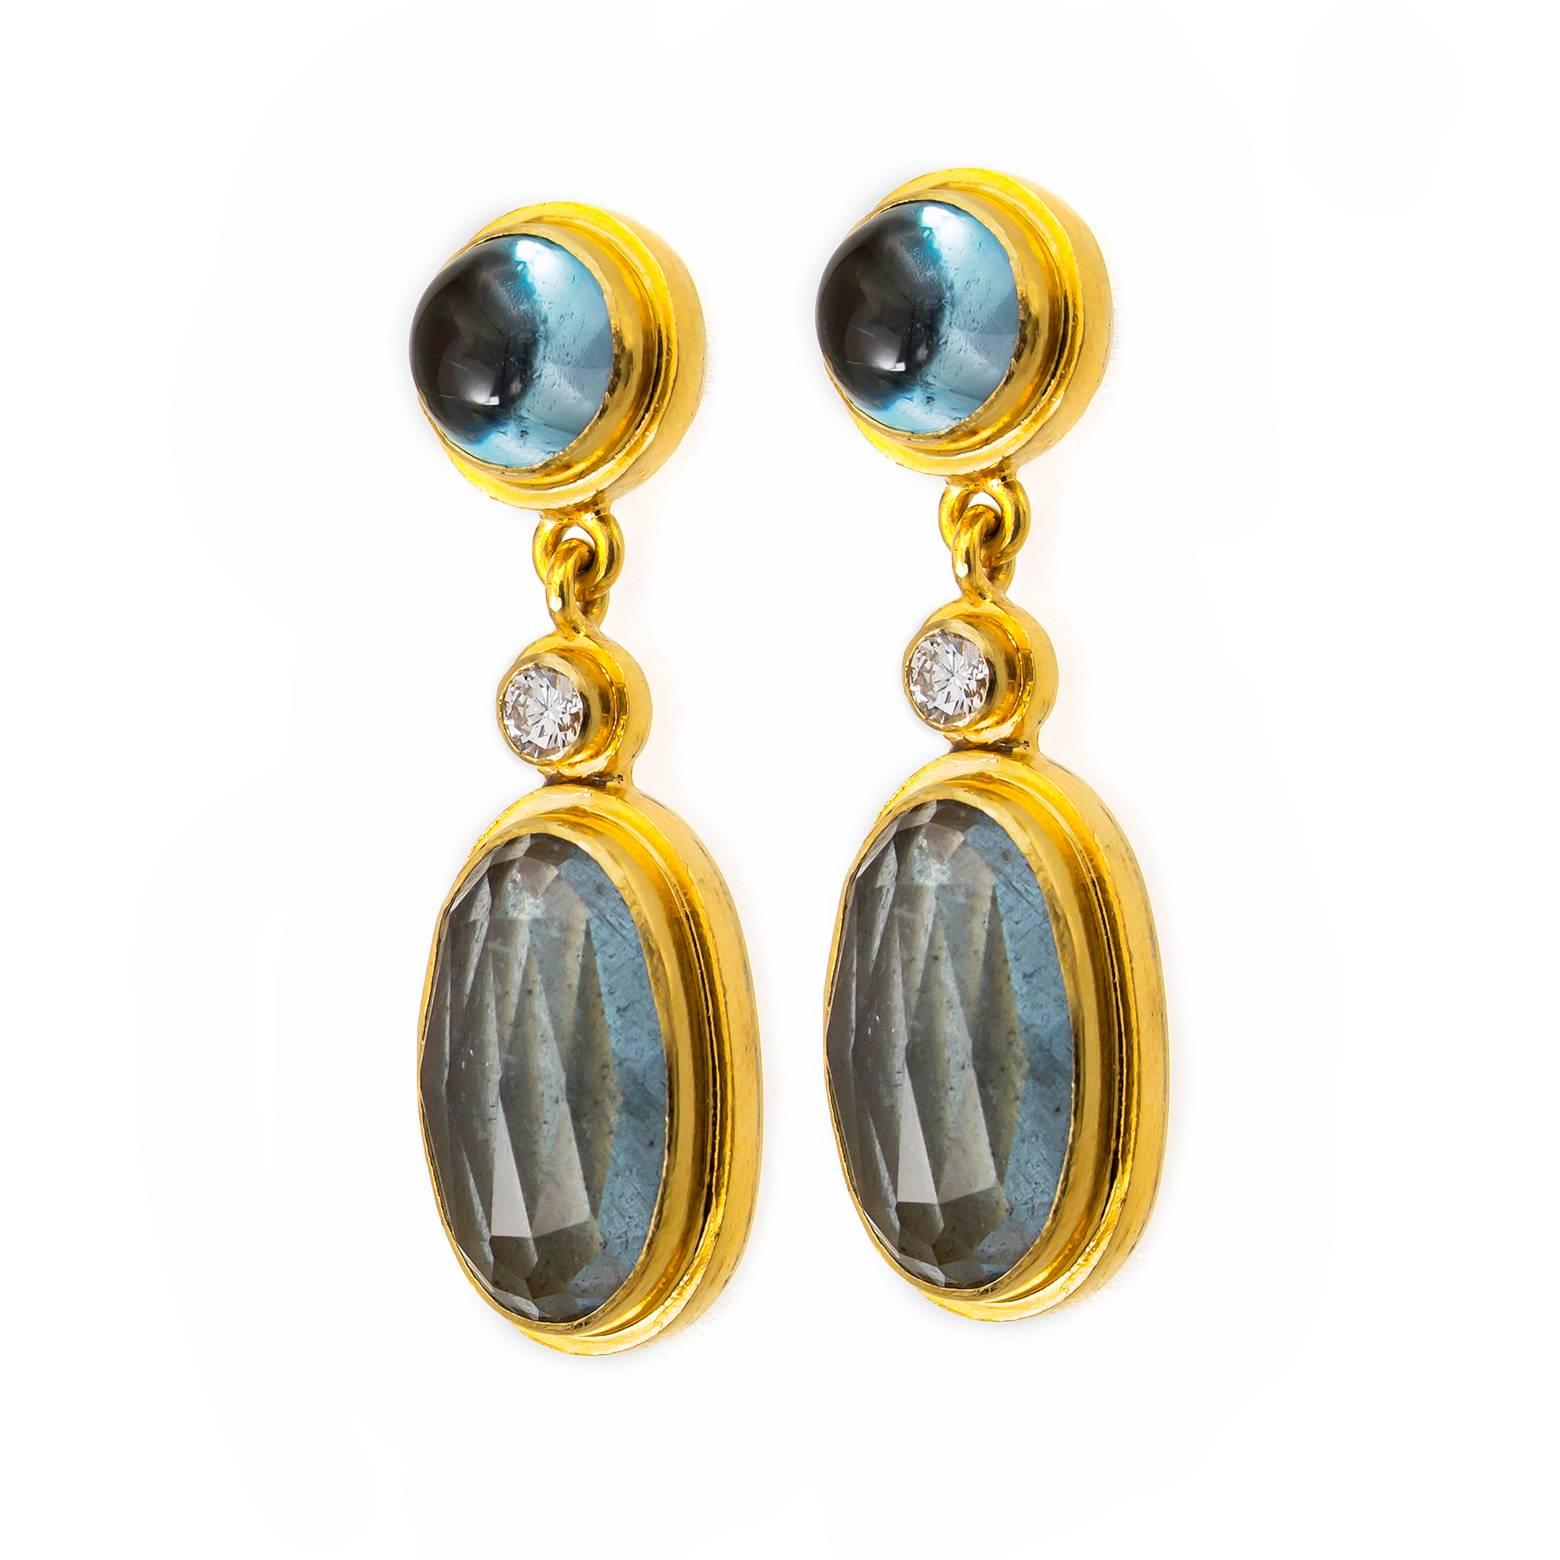 These beautiful, glamorous drop earrings are elegant and earthy set in 18K yellow gold with white diamond accents, blue tourmaline, and oval faceted moss aquamarines. Calming watery earth tones with bright yellow gold compliment these beauties